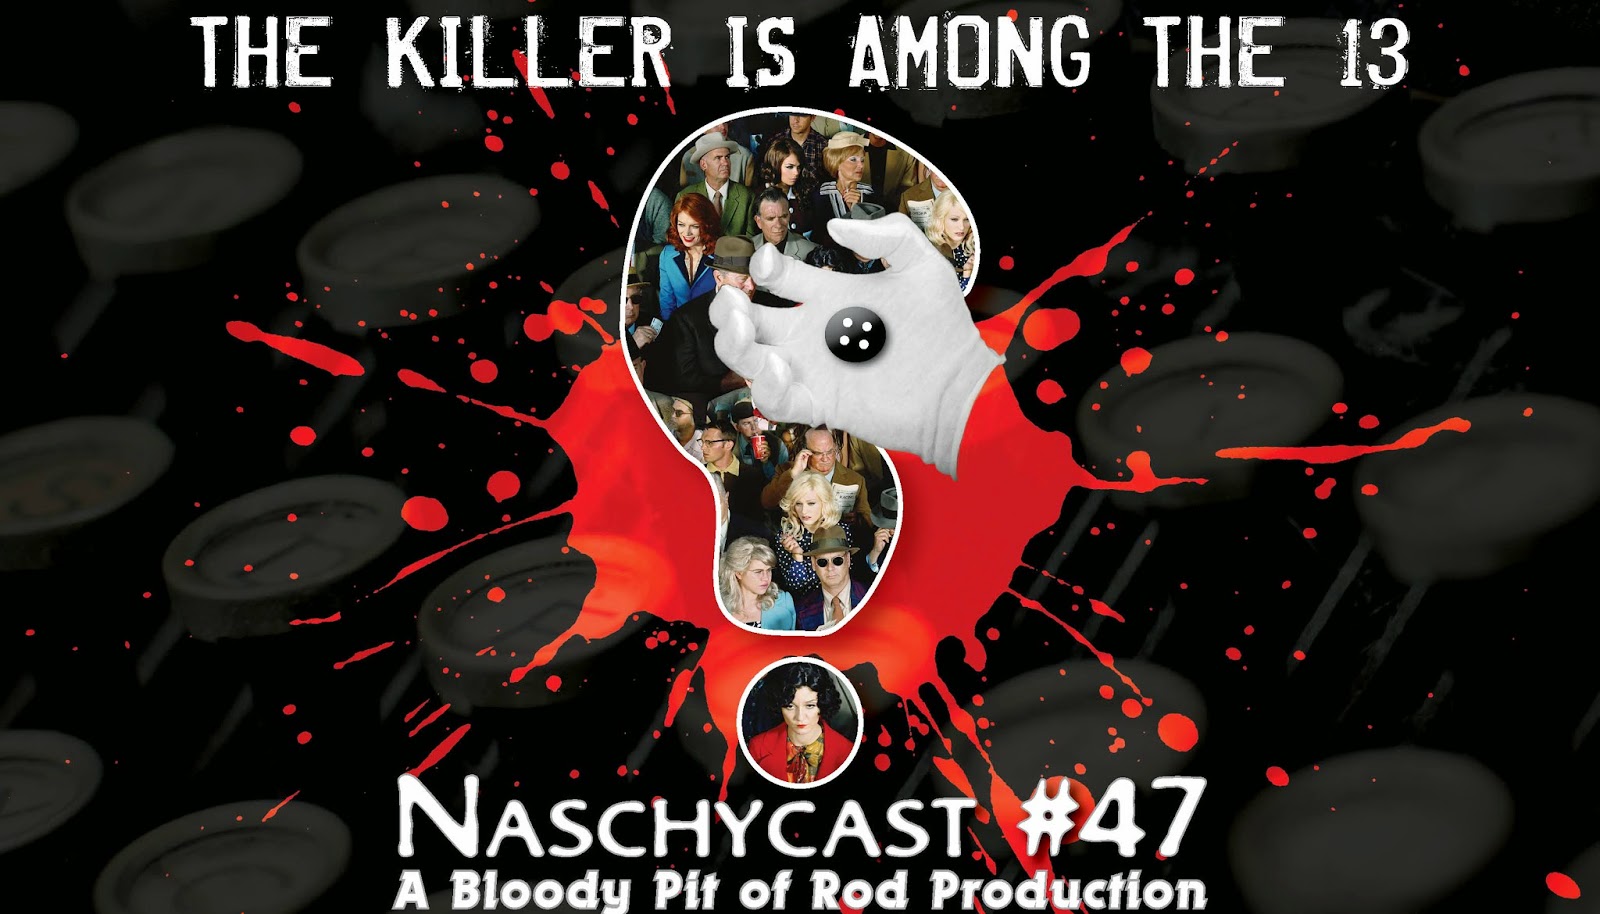 NaschyCast #47 - THE KILLER IS AMONG THE 13 (1976)